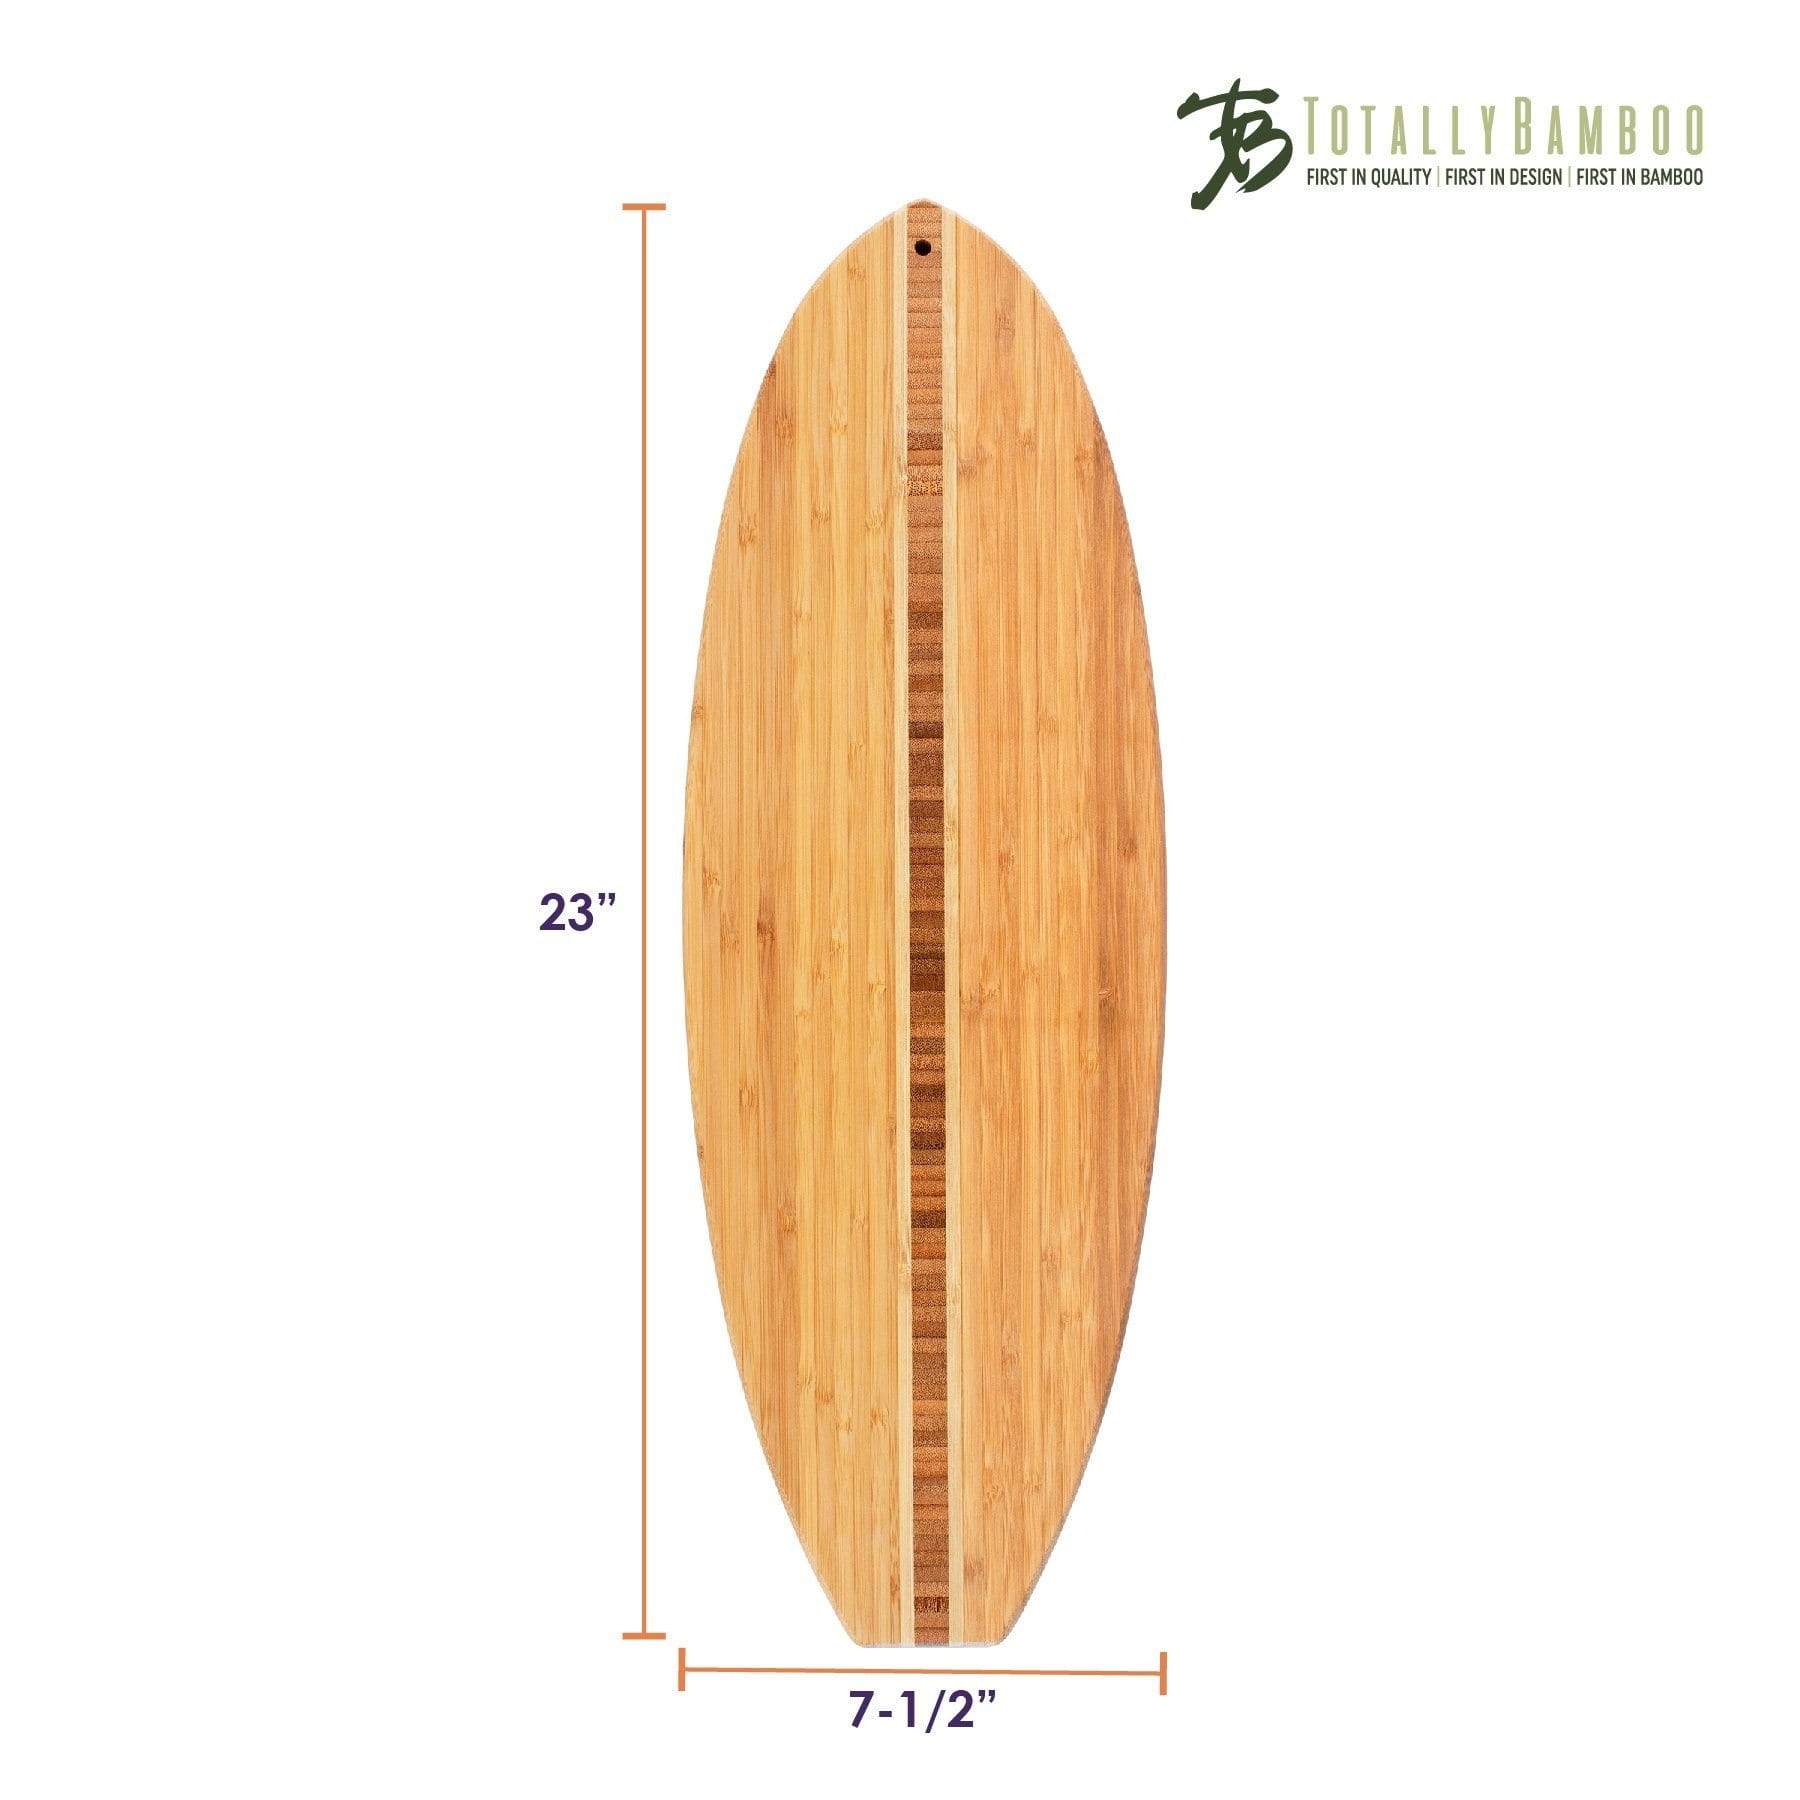 https://totallybamboo.com/cdn/shop/products/surfboard-shaped-bamboo-serving-and-cutting-board-23-x-7-12-totally-bamboo-440506.jpg?v=1627856123